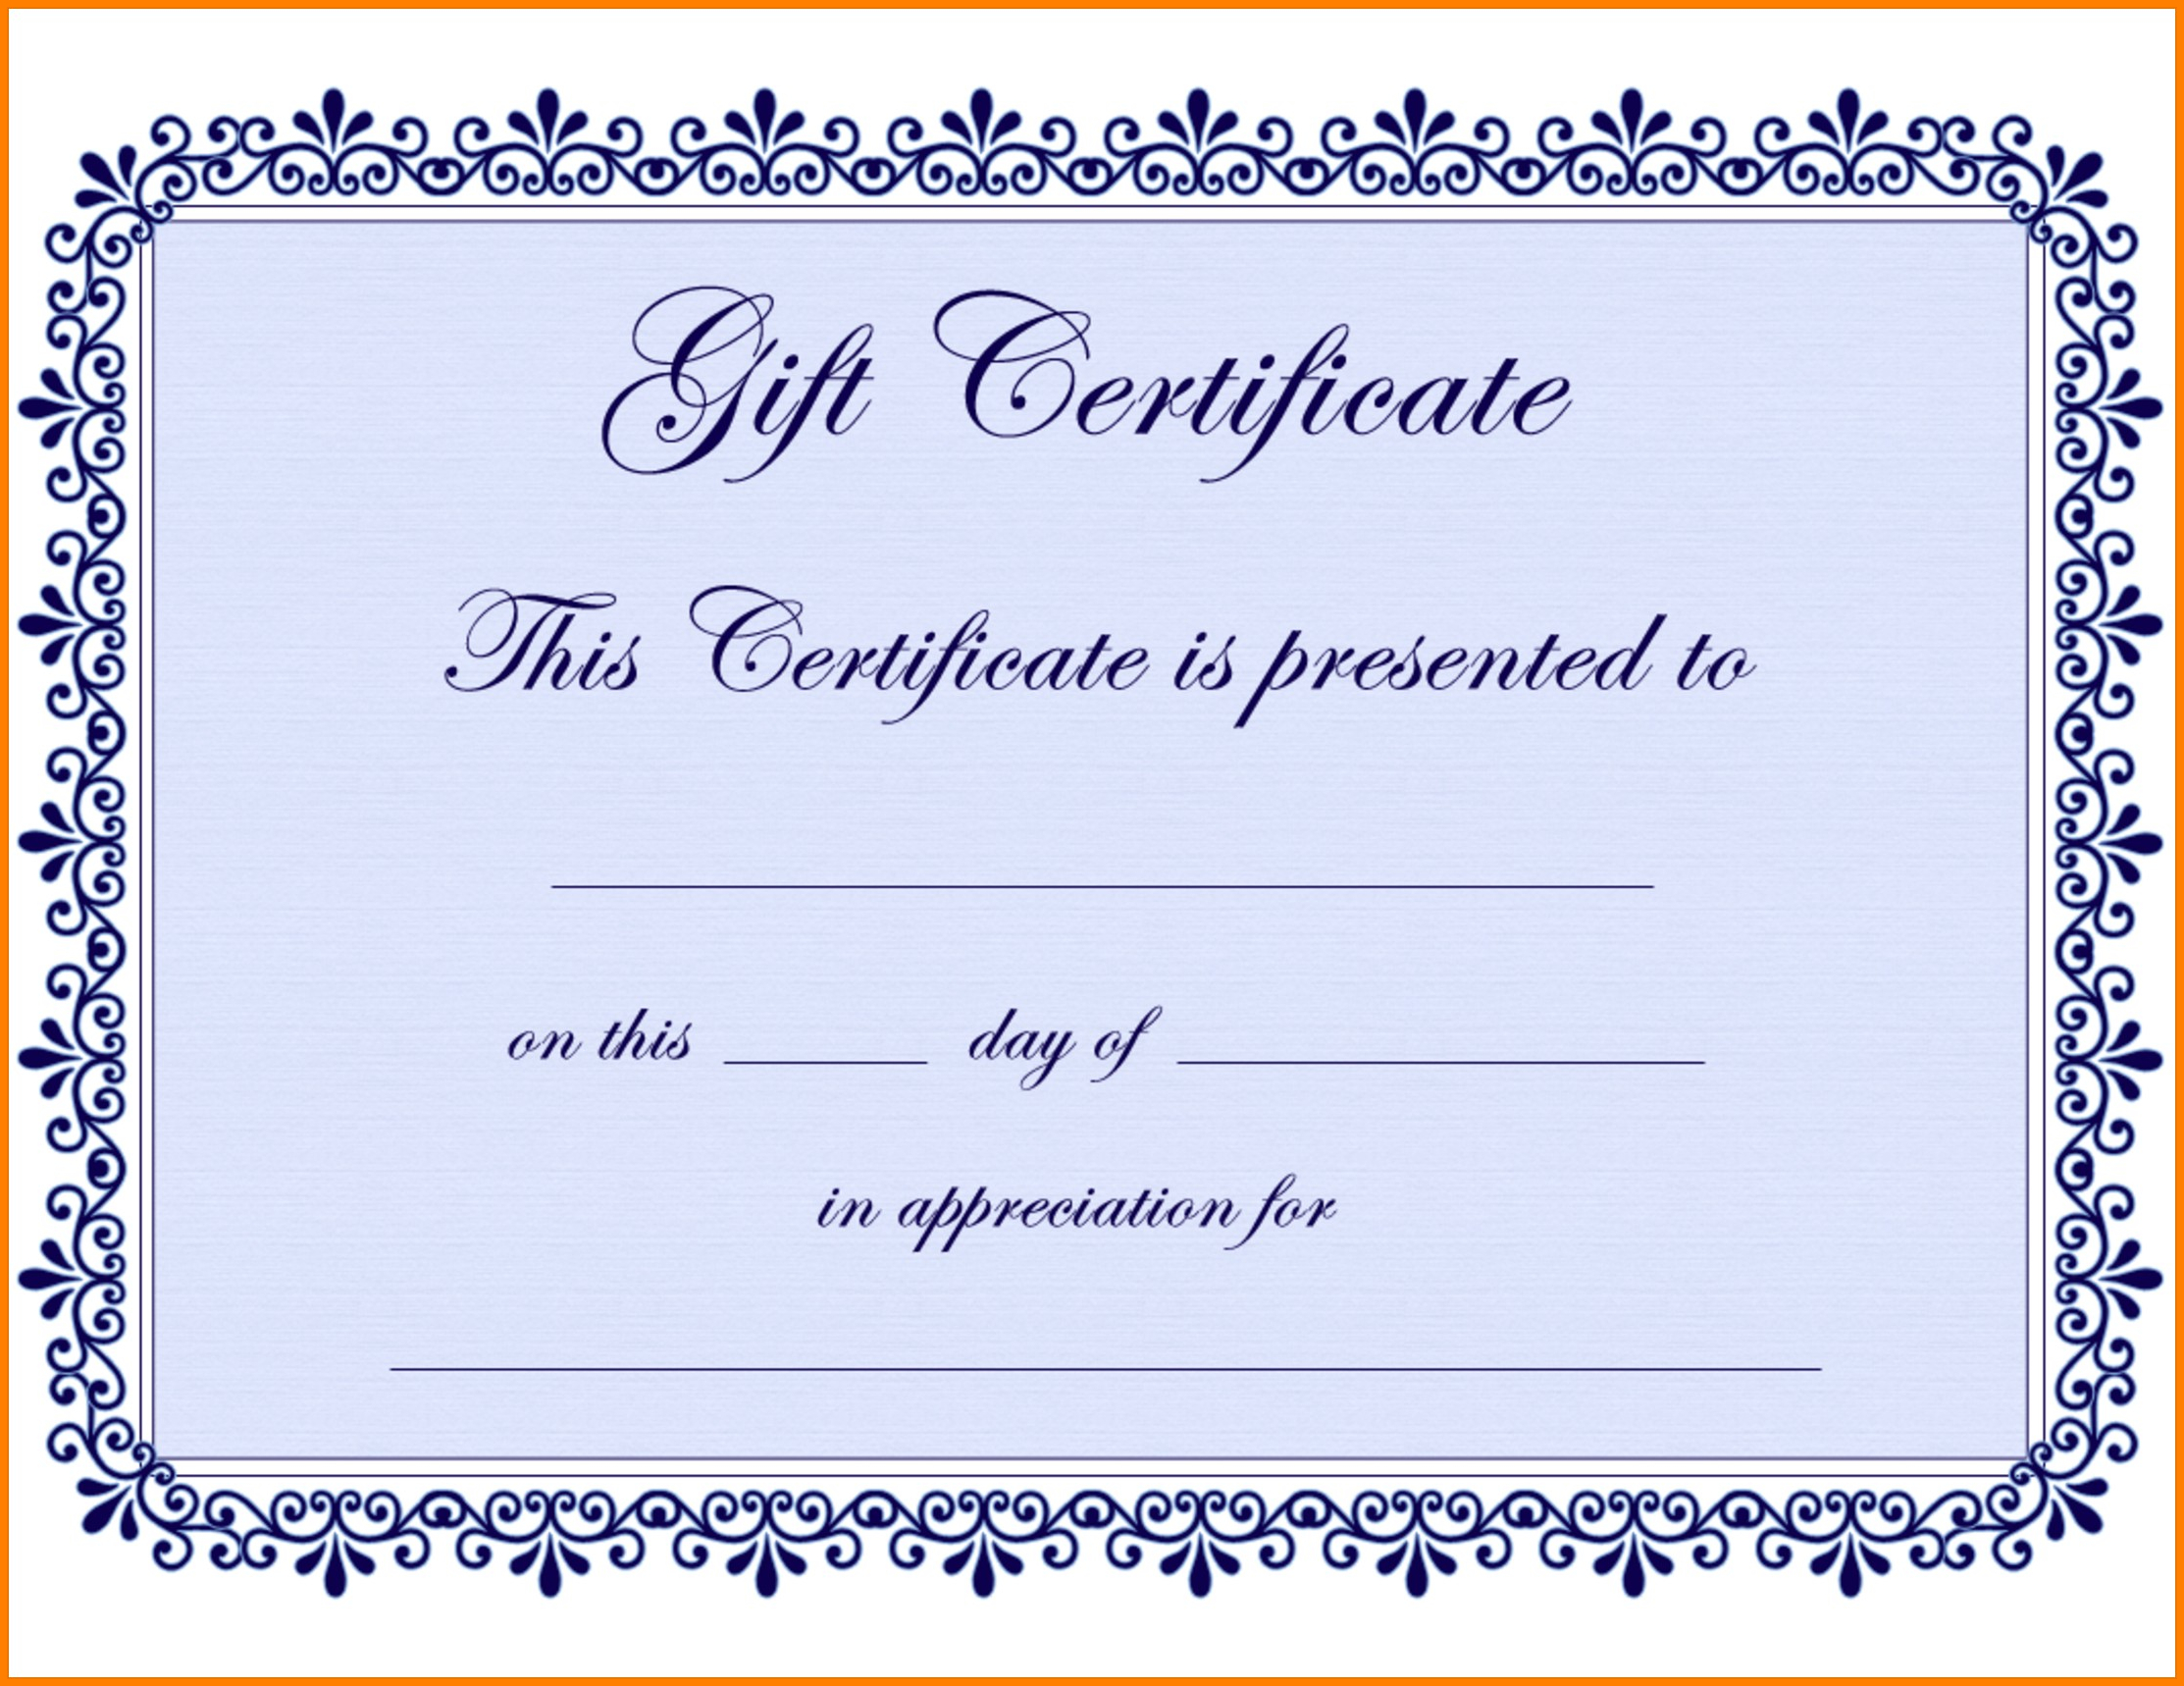 Gift Certificate Template Png | Certificatetemplategift With Regard To Free Certificate Templates For Word 2007